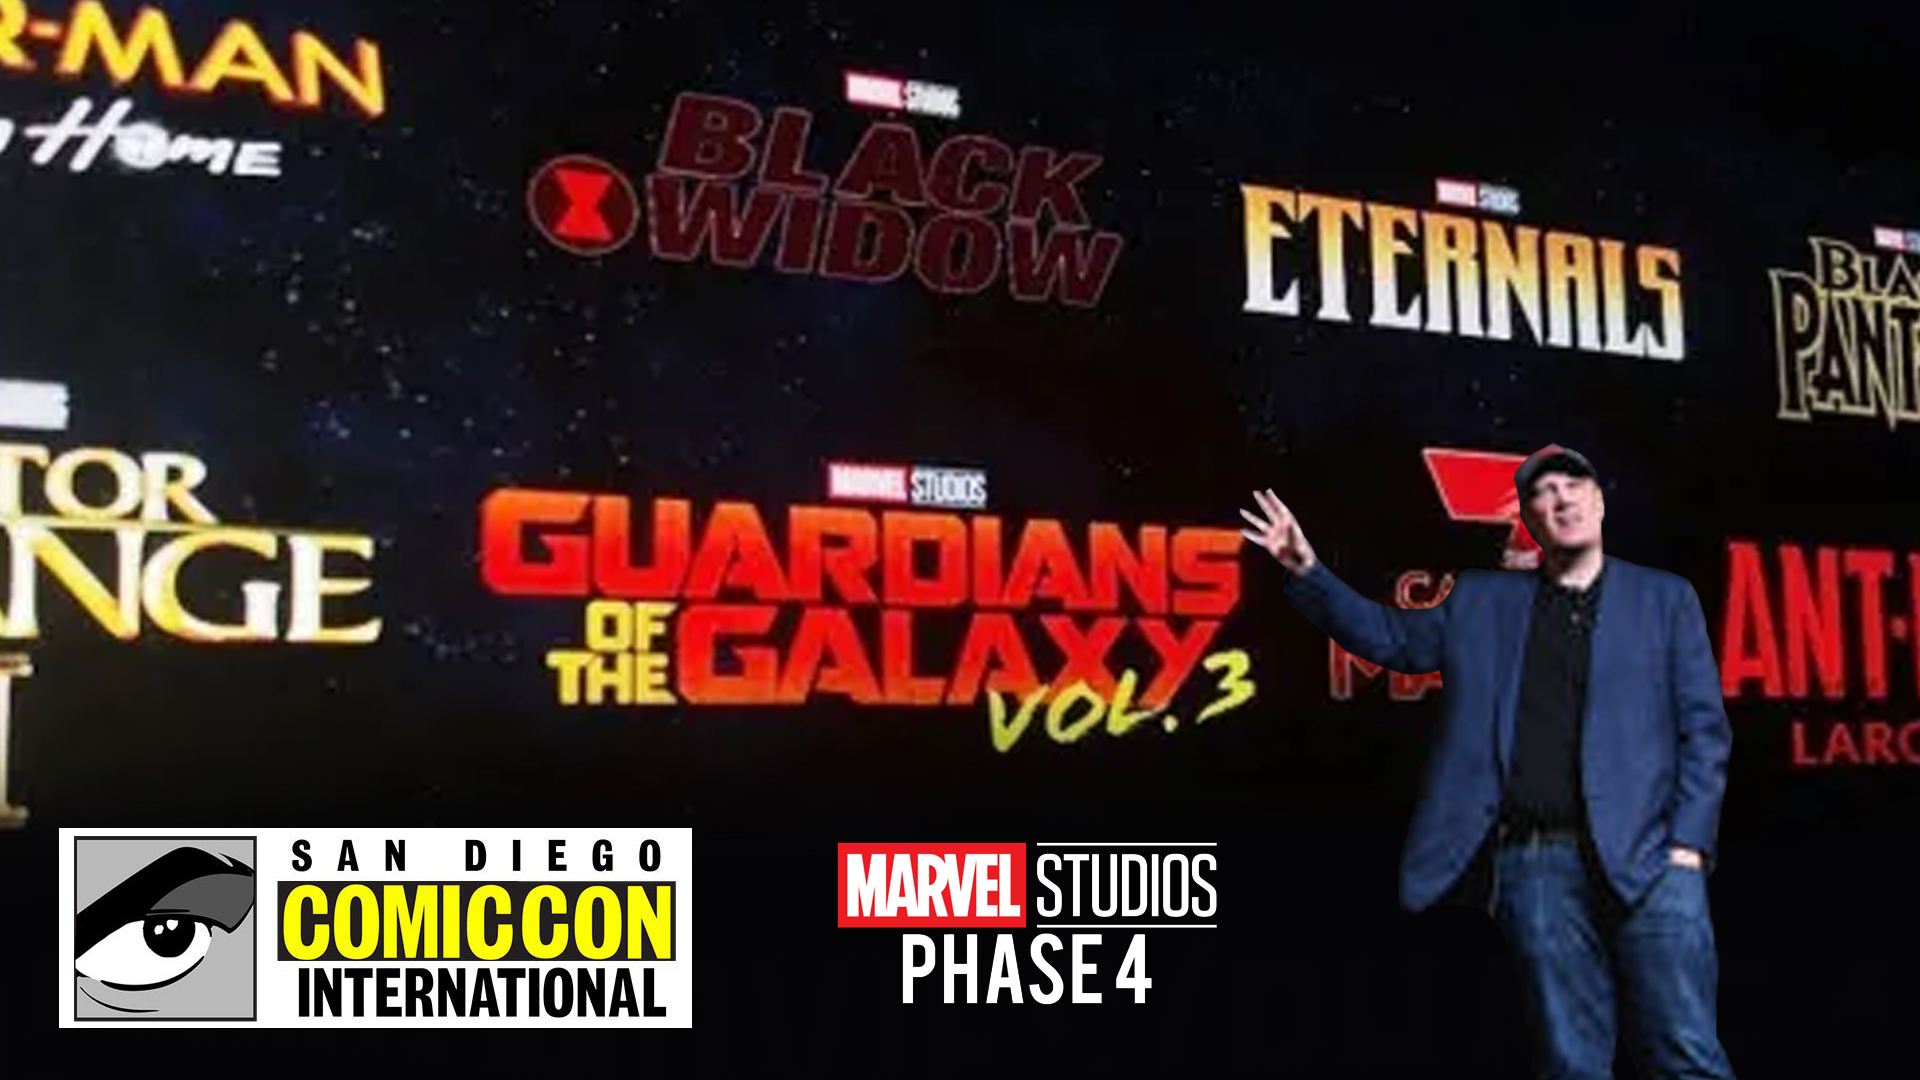 sdcc 2019 marvel mcu panel explained all upcoming movies tv shows games and more black widow doctor stranger 2 spiderman captain marvel guardians of the galaxy thor kevin feige